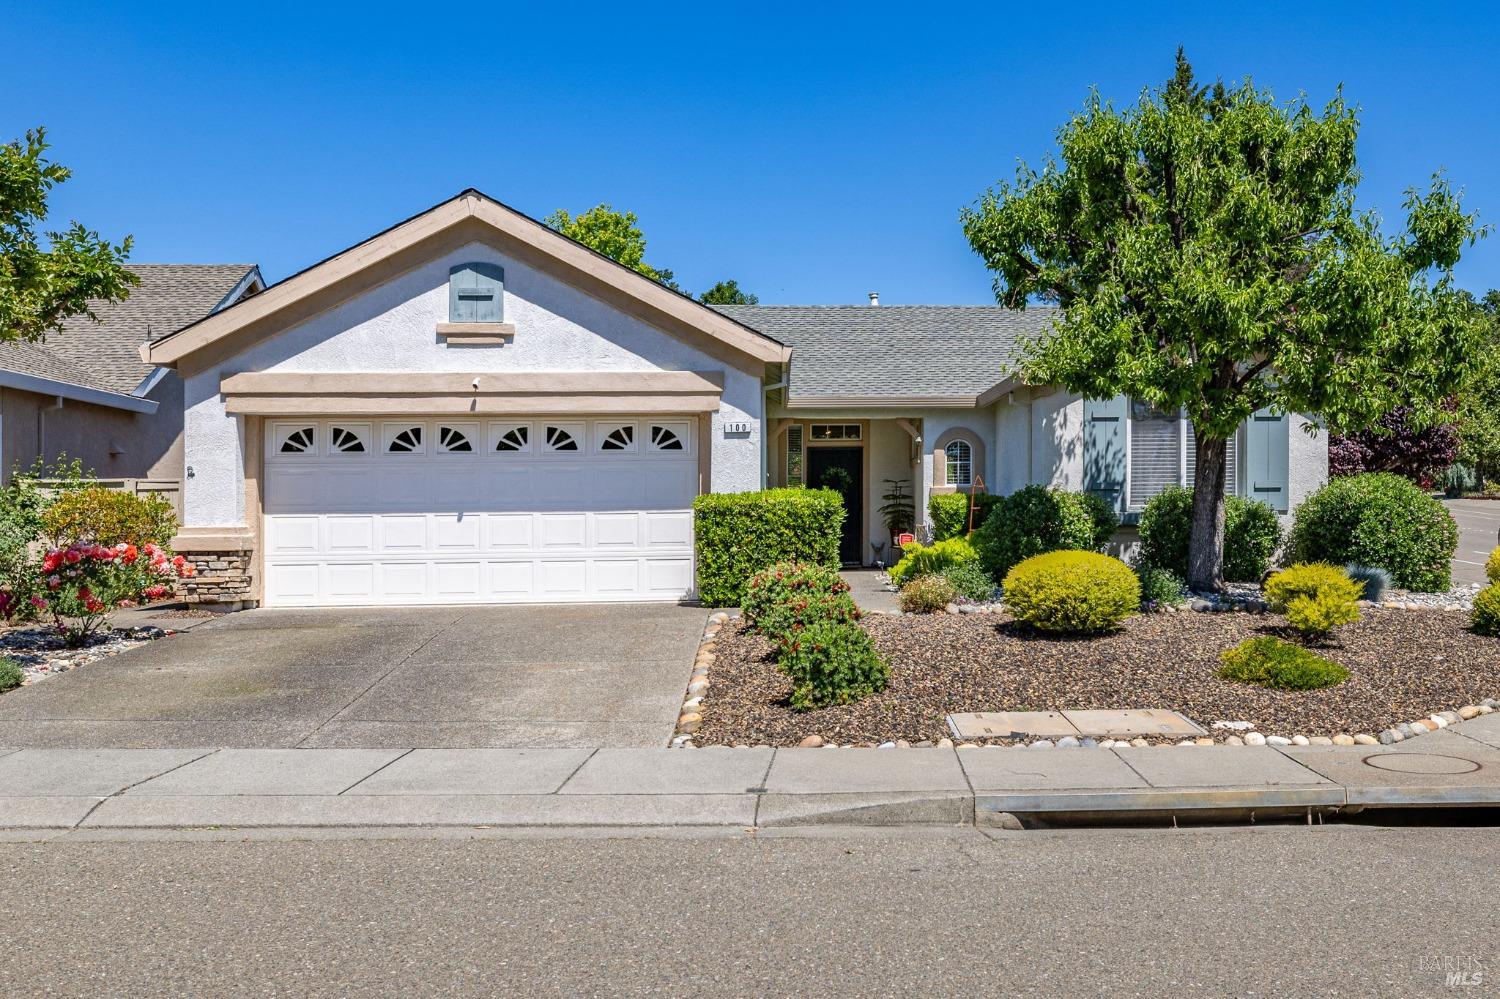 Immaculate Calistoga Model in the highly sought after Clover Springs Senior Community. This well maintained 2 bedroom, 2 bath home has plenty of natural light and large living and dining space. Additional kitchen area can be used for dining or office. Oversized primary bedroom and large walk-in closet. Newer Oak wood plank flooring, window coverings, light fixtures and closet built-ins. Separate laundry room.  Backyard covered patio with plenty of space for gardening. Lots of shelving in garage for storage. The community has a pool, spa, gym, tennis courts, bocce ball and hiking trails.